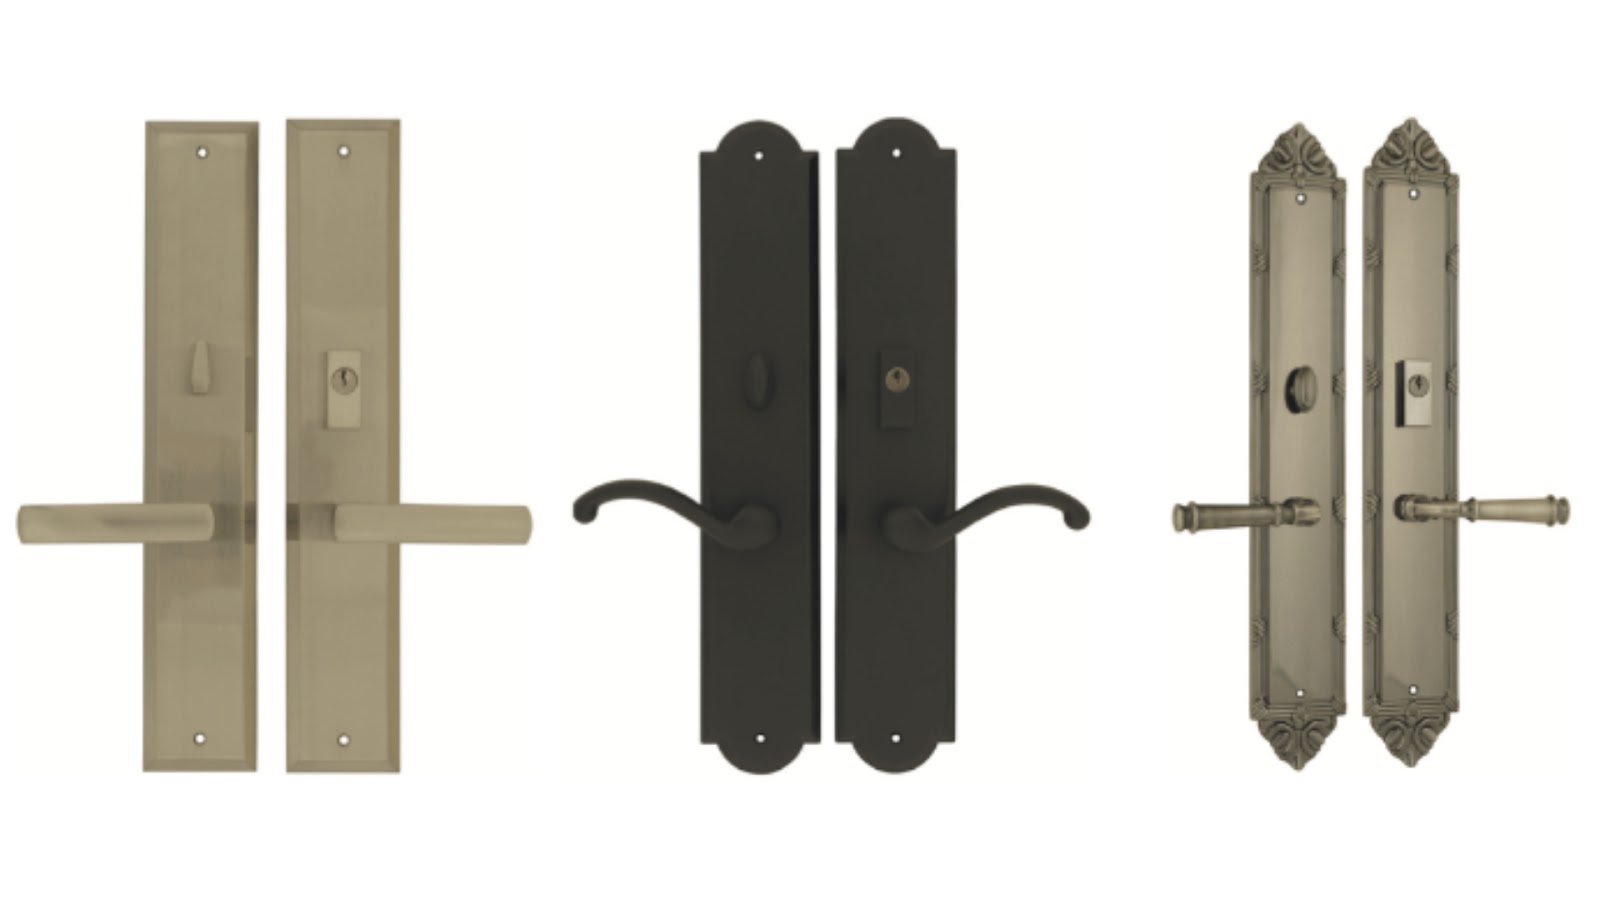 Multipoint locks in different styles and finishes